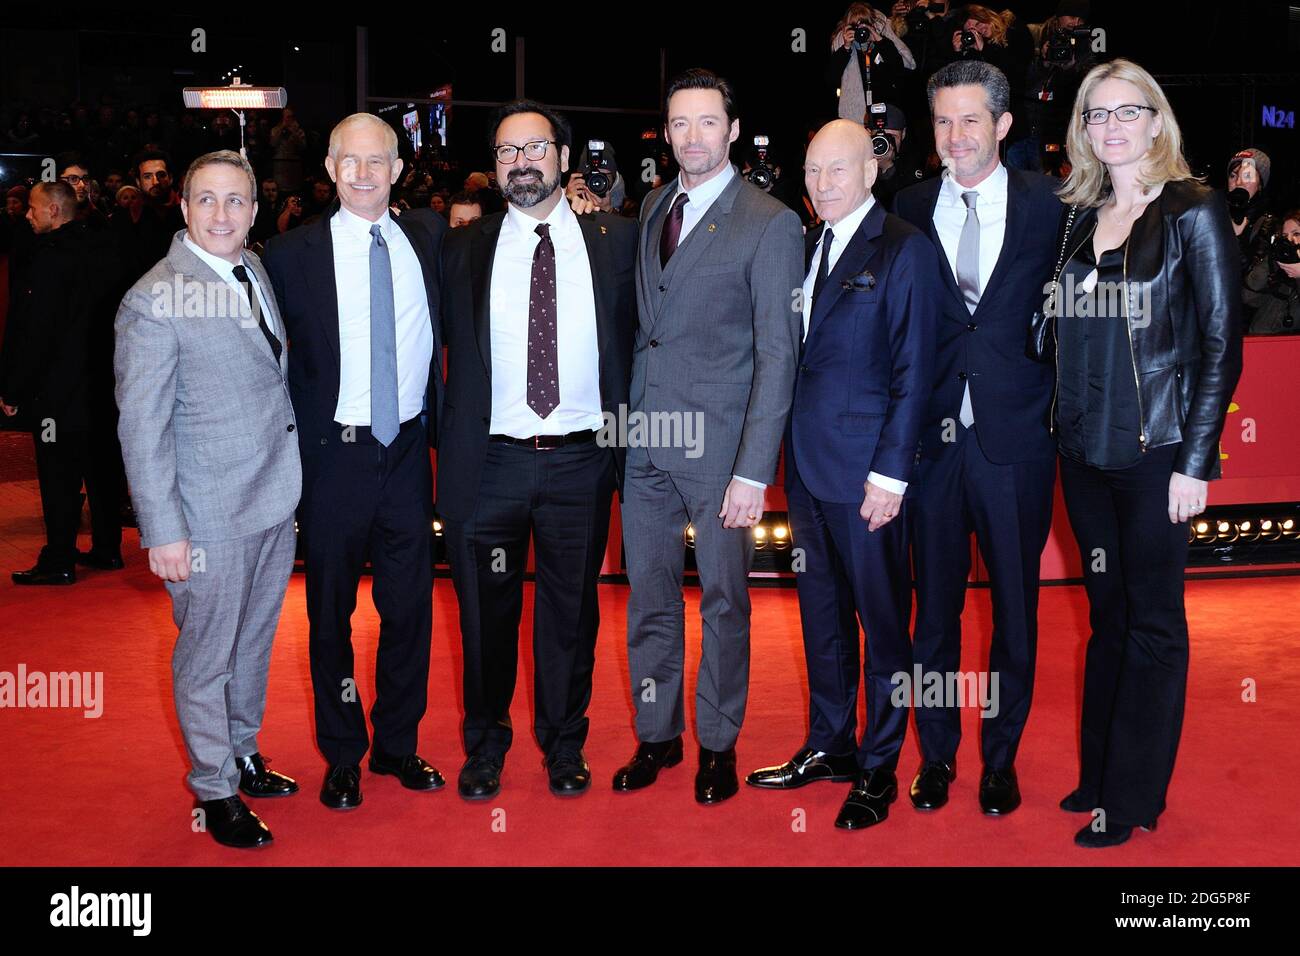 Hutch Parker, Simon Kinberg, James Mangold, Patrick Stewart and Hugh Jackman attending the Logan Premiere during the 67th Berlin International Film Festival (Berlinale) in Berlin, Germany on Februay 17, 2017. Photo by Aurore Marechal/ABACAPRESS.COM Stock Photo